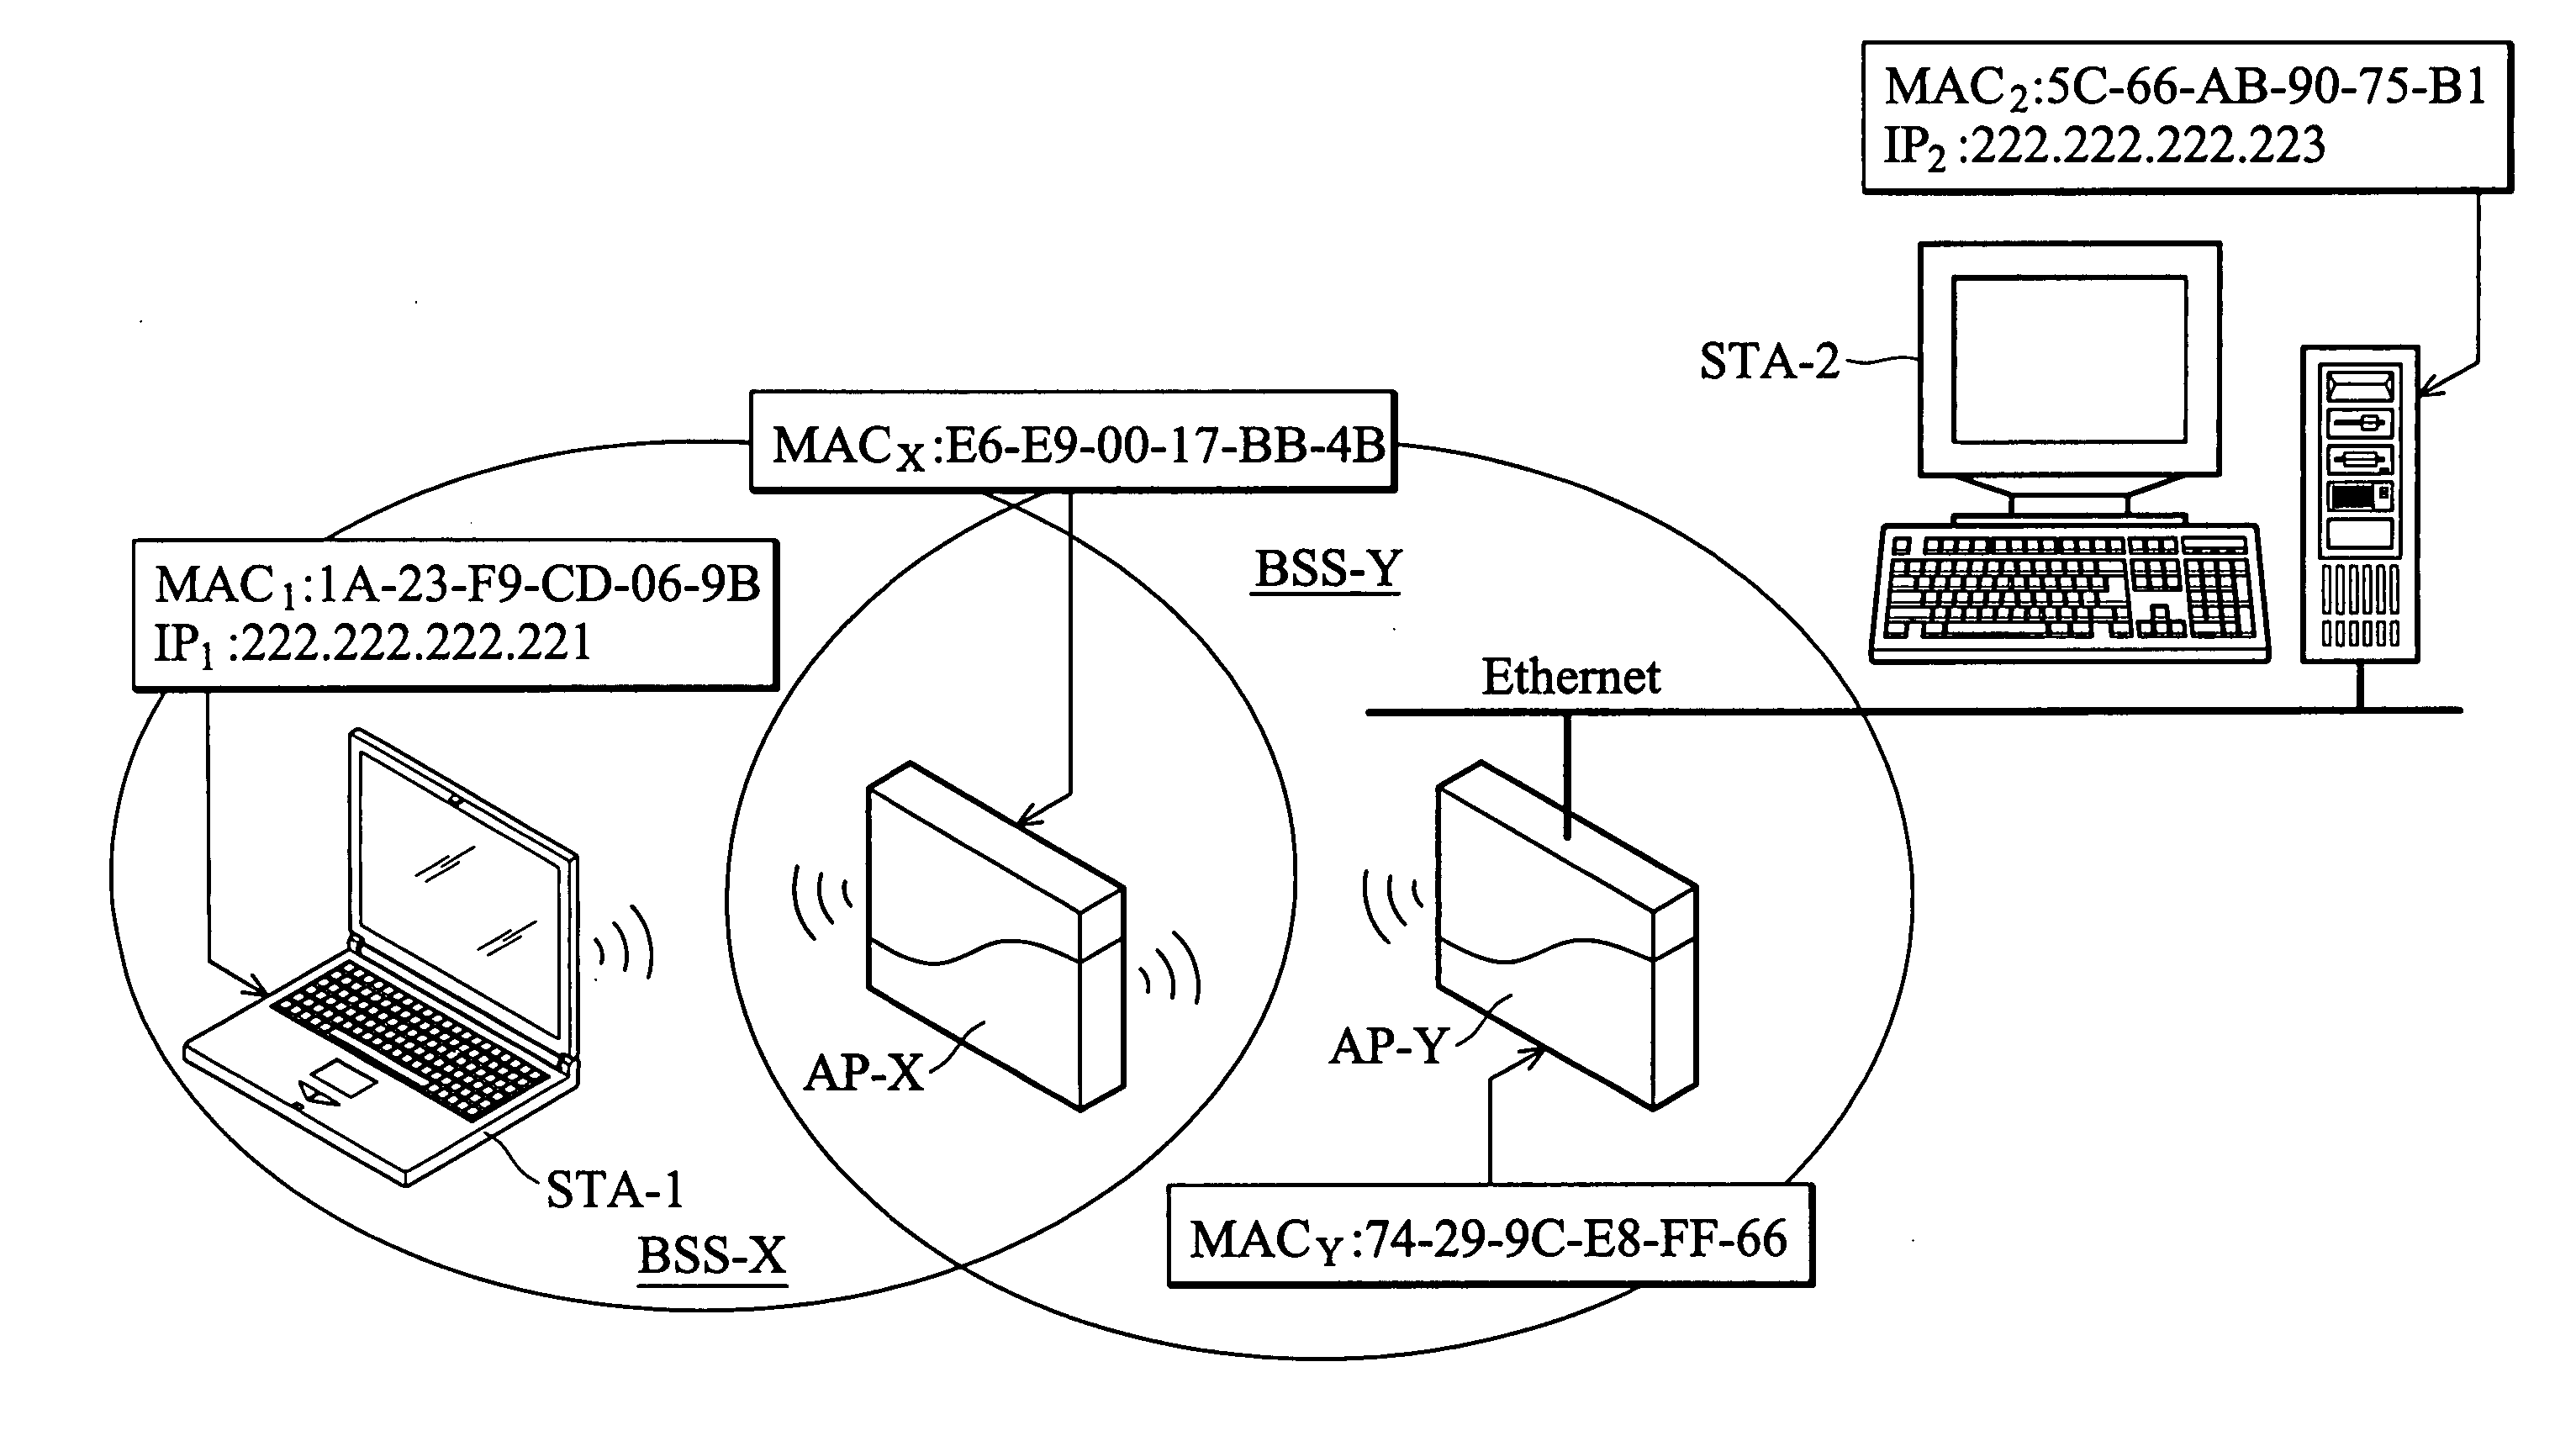 Method and apparatus for wireless relay within a network environment